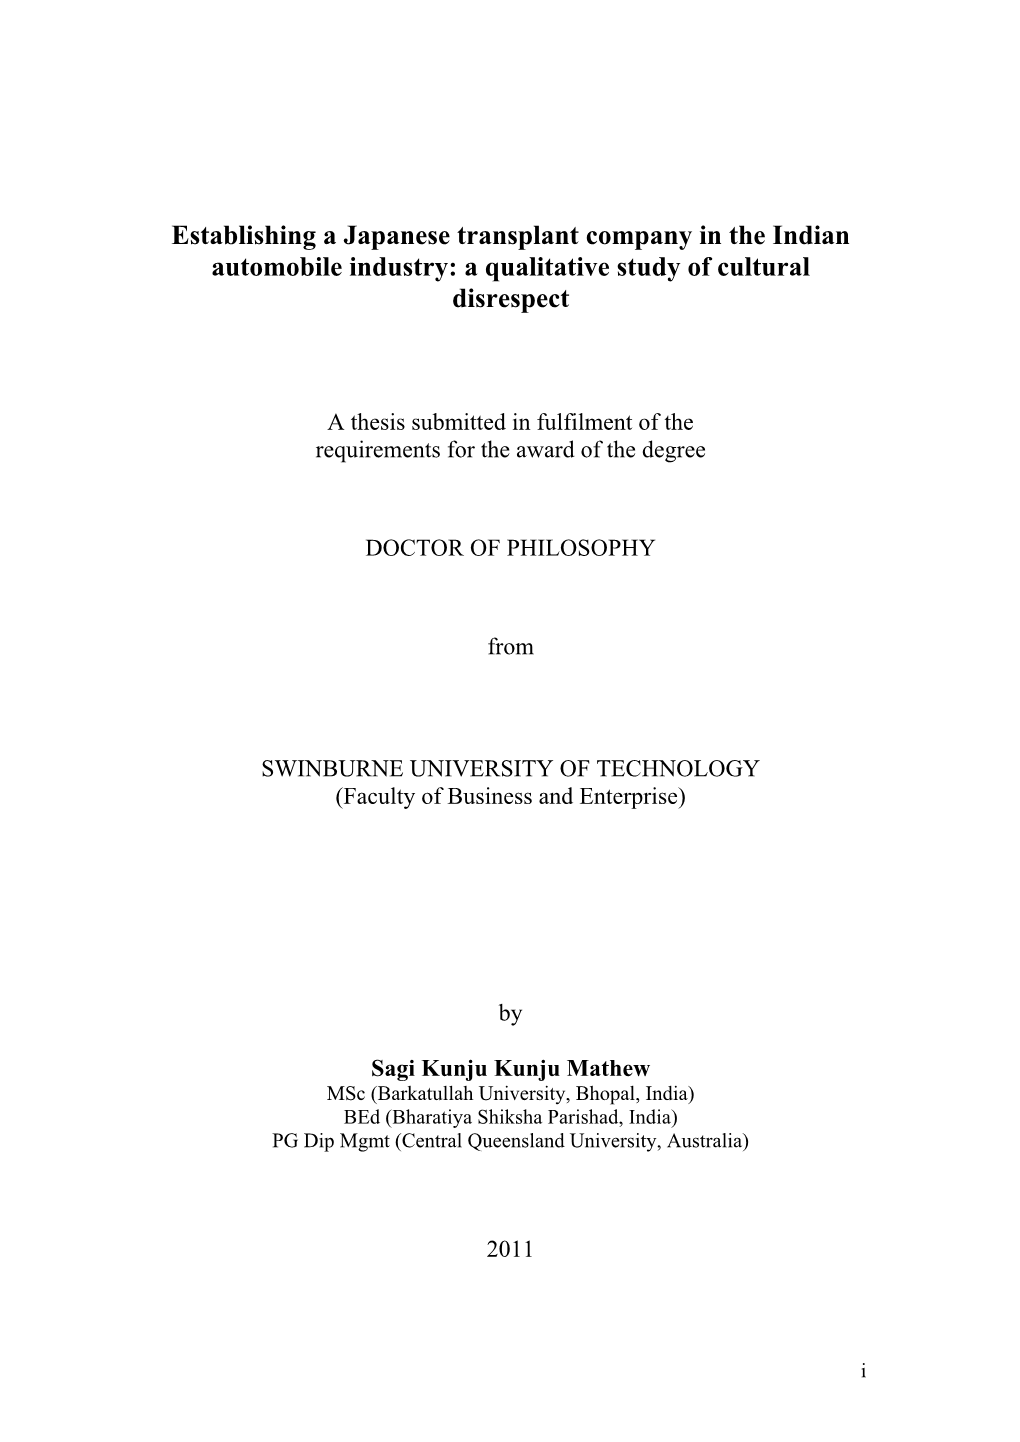 Establishing a Japanese Transplant Company in the Indian Automobile Industry: a Qualitative Study of Cultural Disrespect